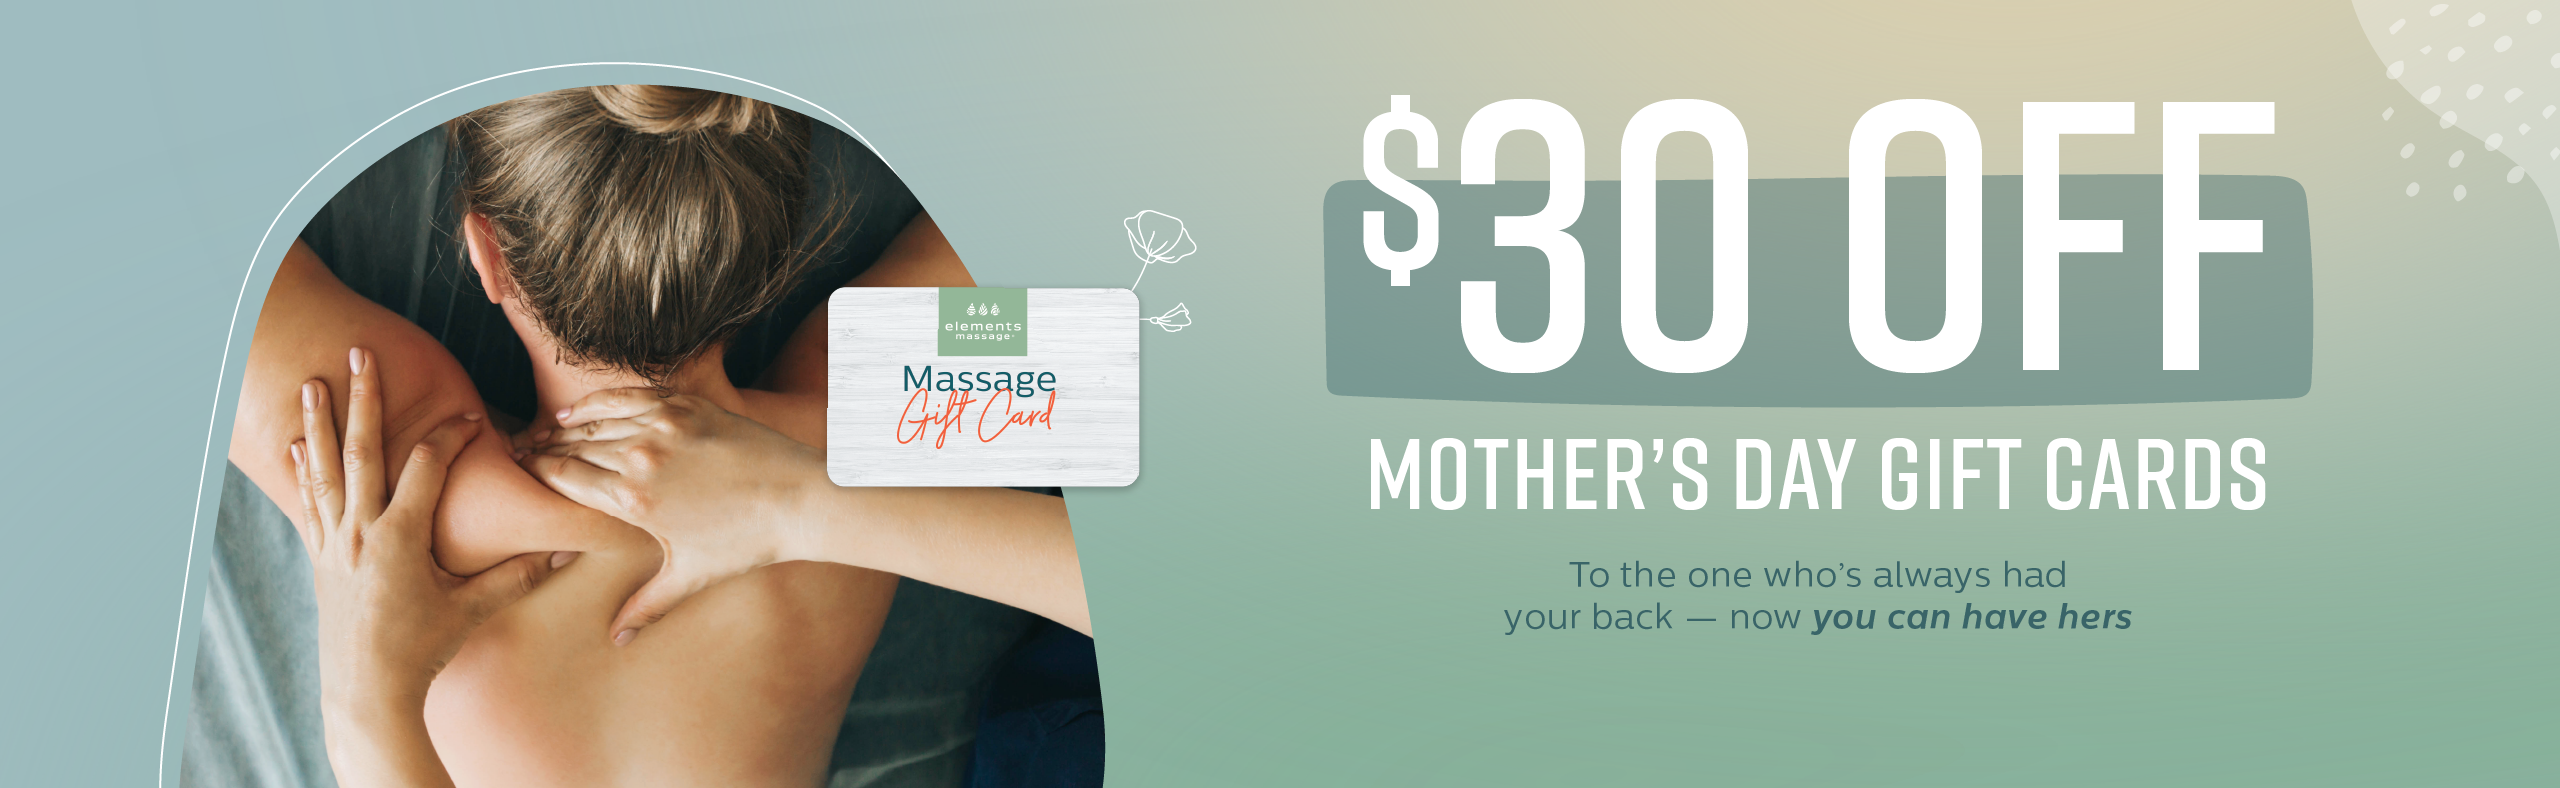 Mother's Day gift card offer